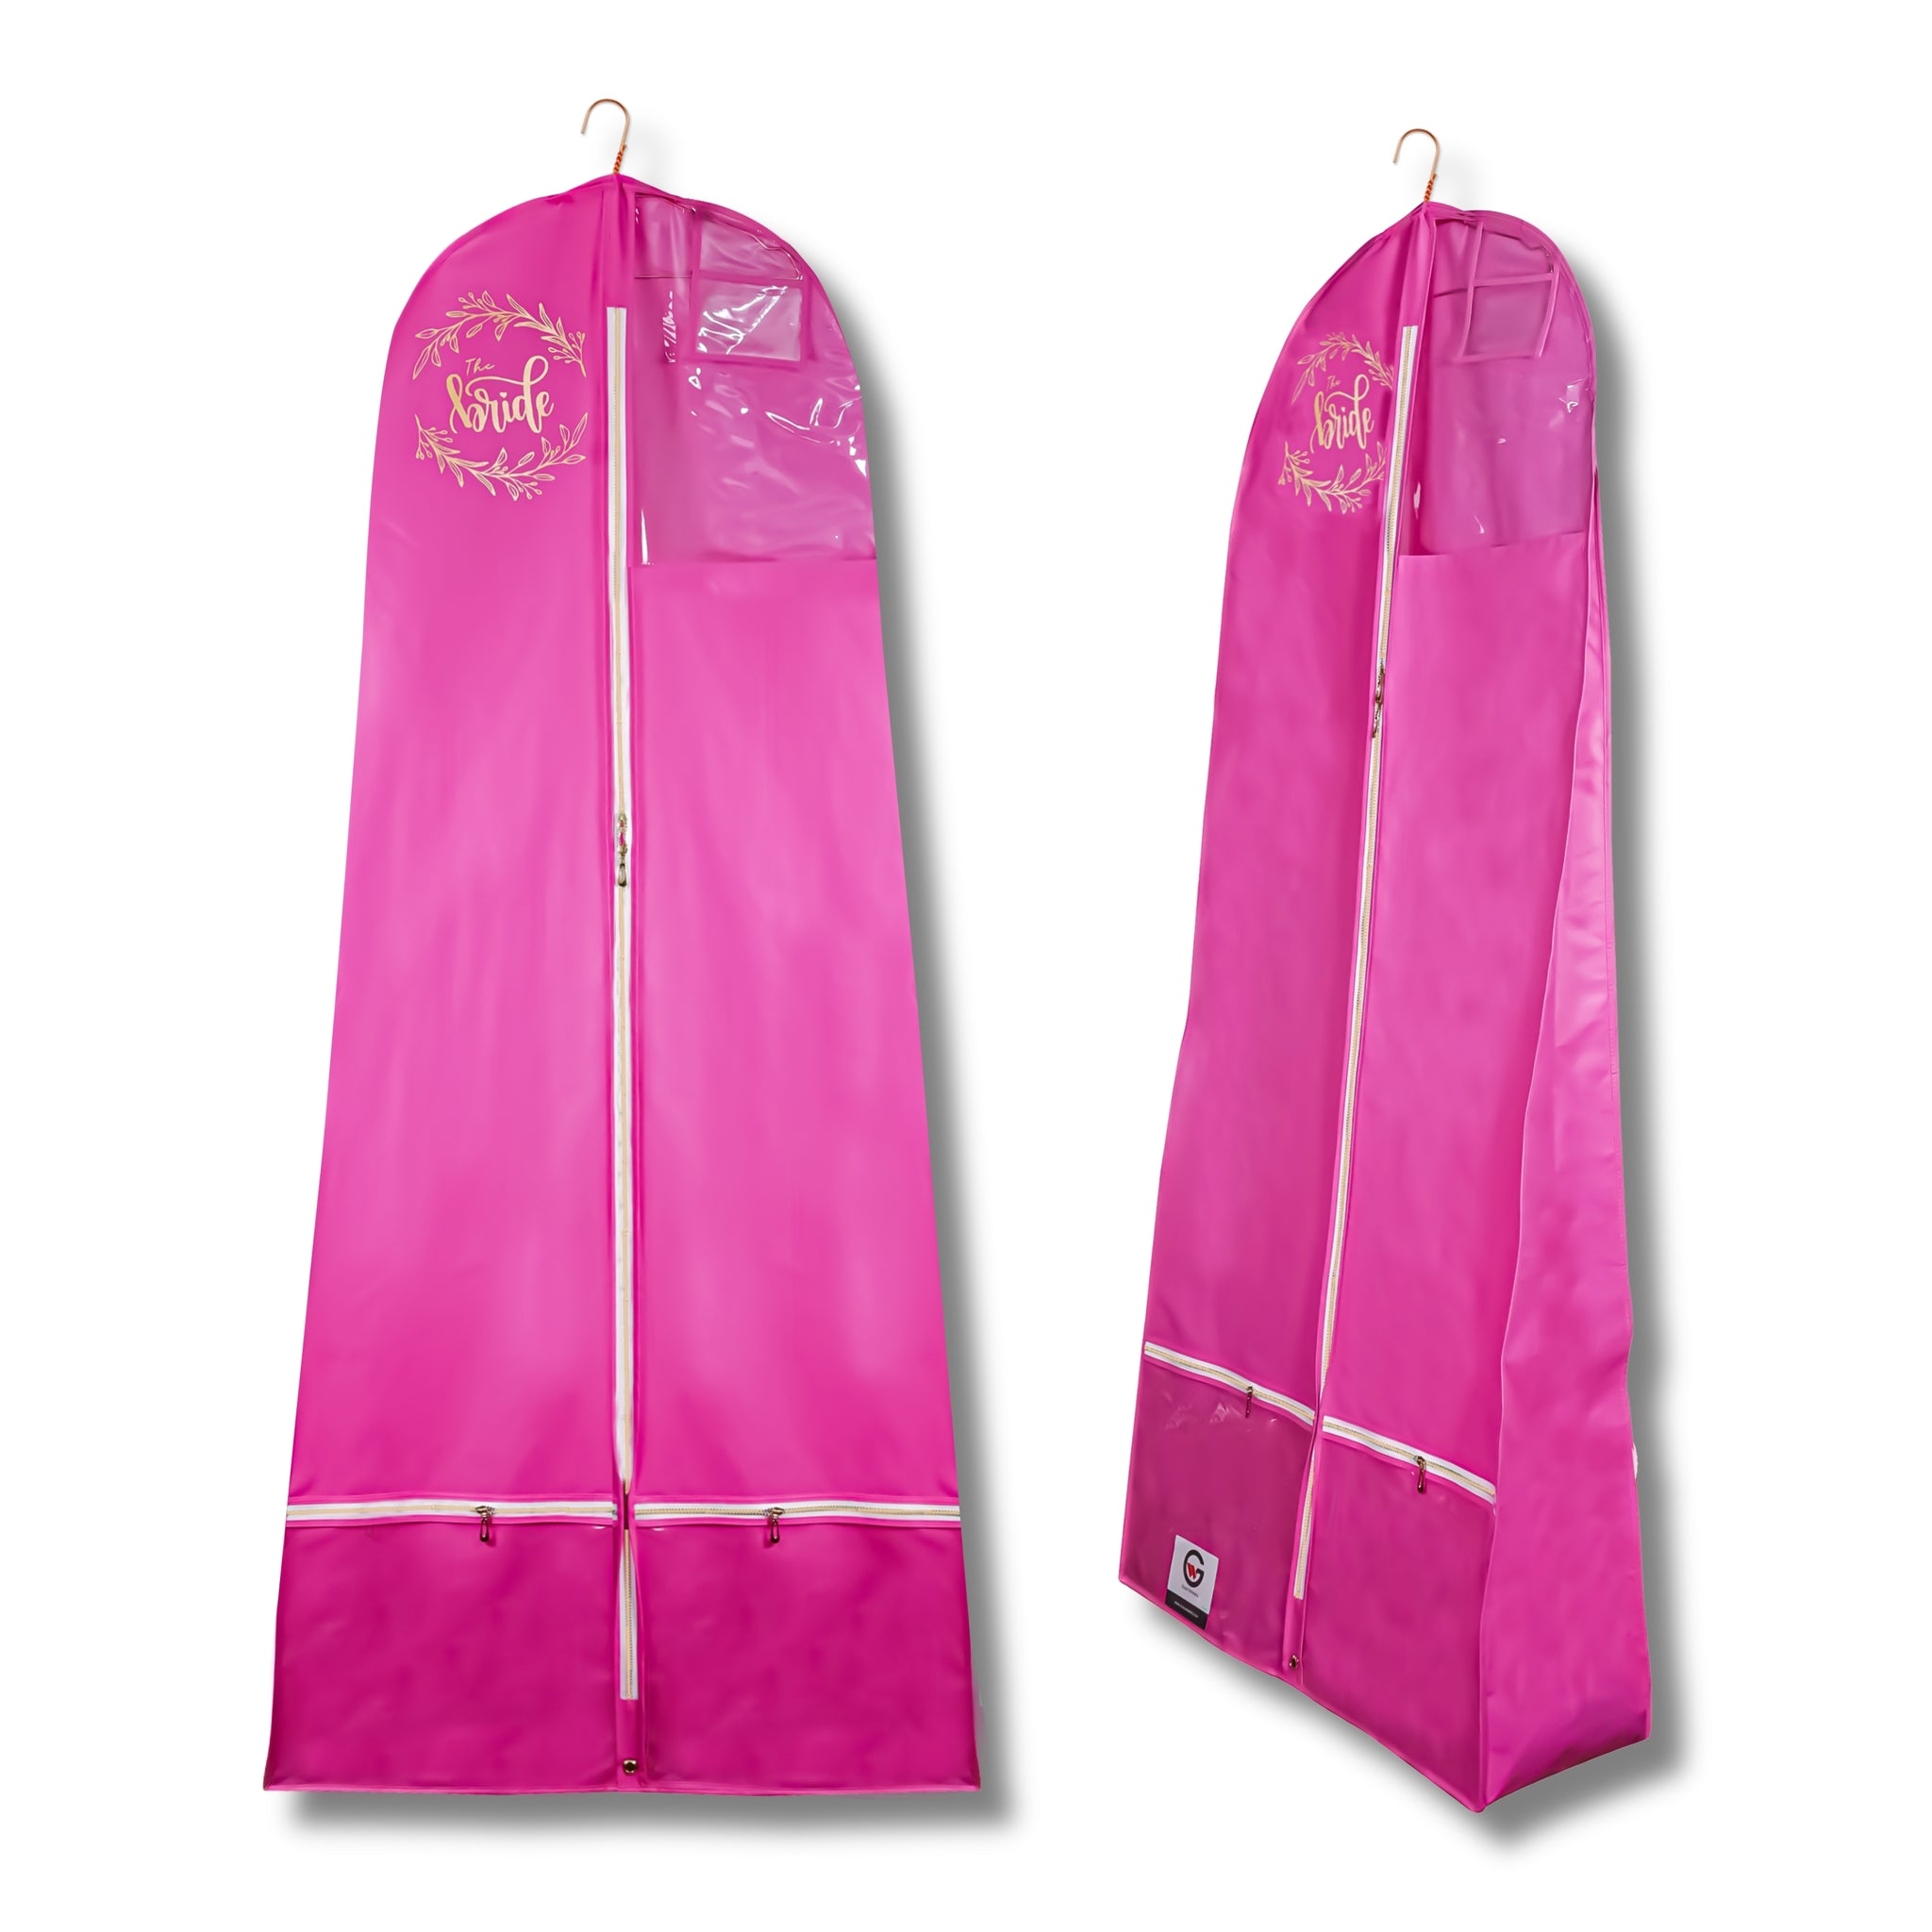 Buy KIWI BAGS Printed PP Lehenga Cover with Transparent Window/Cloth  Storage with Handles/Lehenga, Saree, Heavy Dresses Packing Covers For  Wedding Dress/Foldable Organizer Bag for Dresses - Pink, Pack of 2 Online at